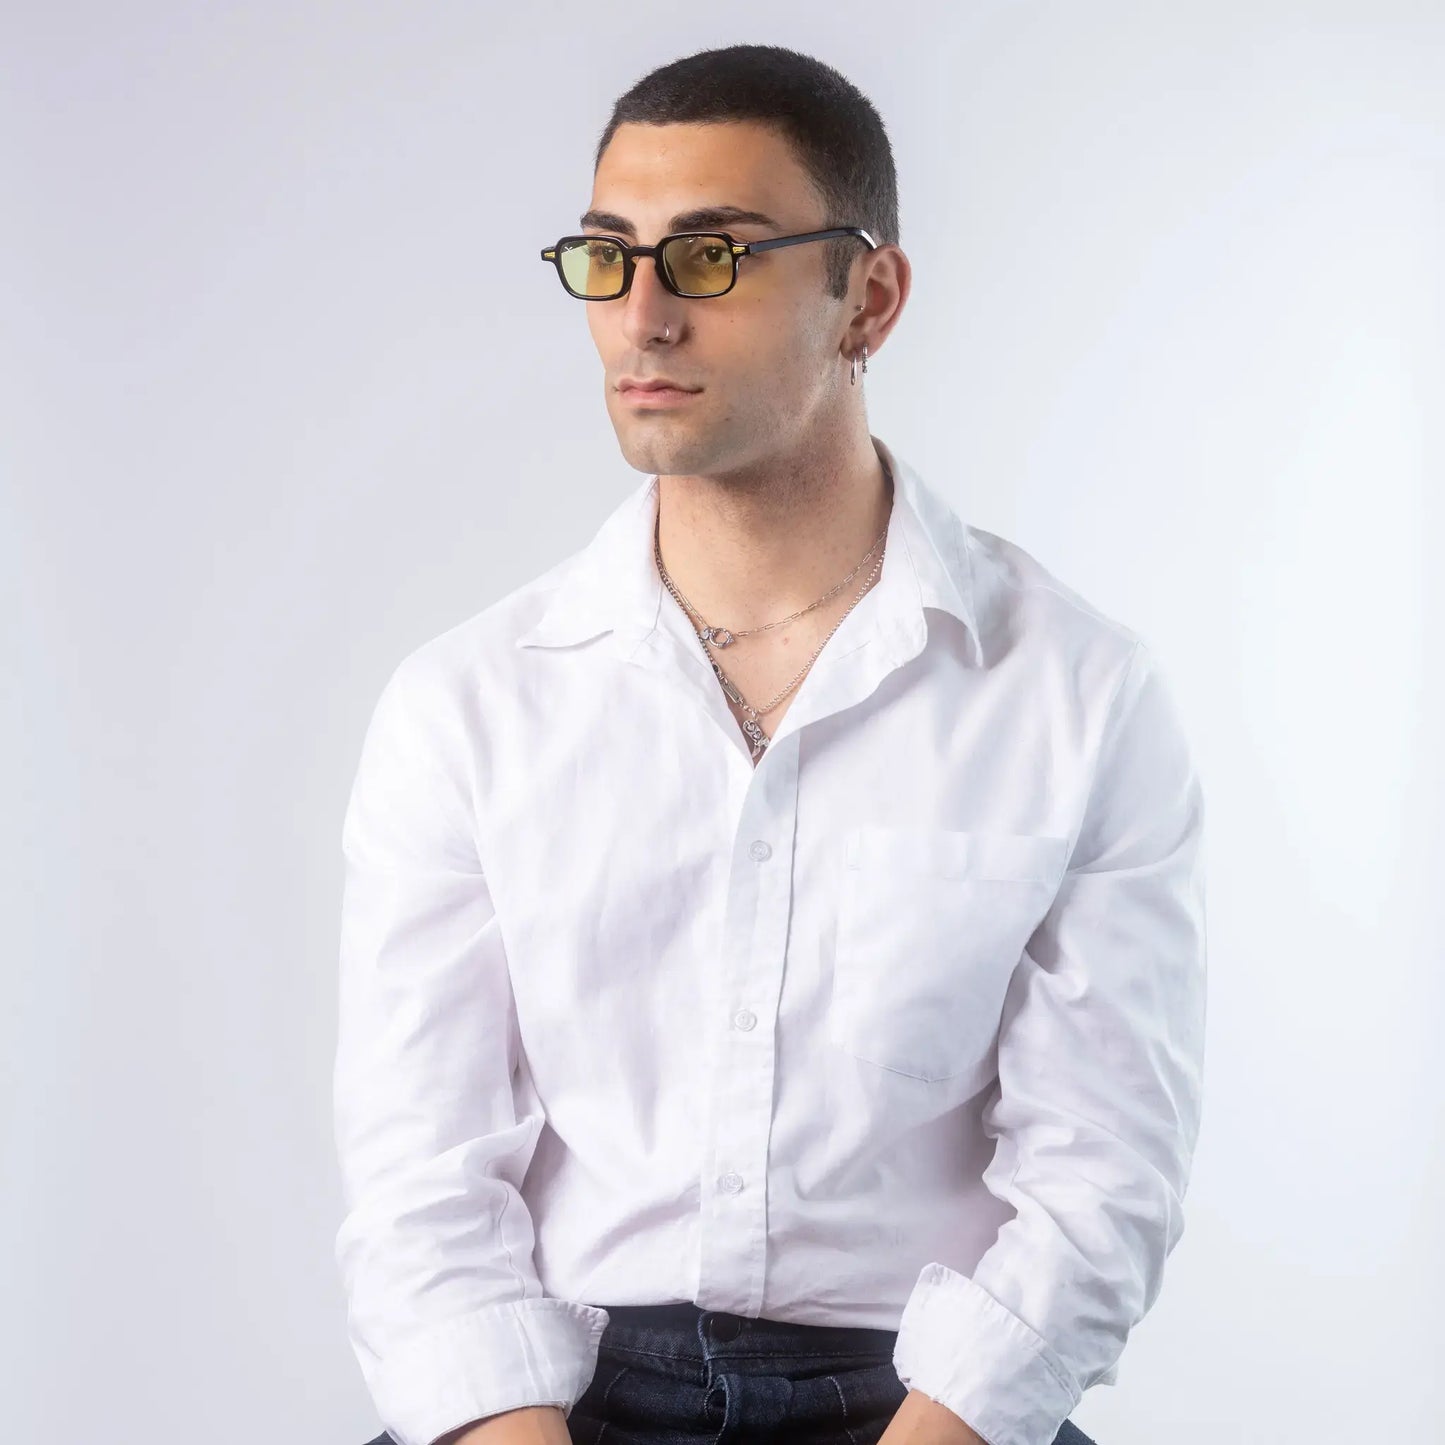 A male model wearing Exposure Sunglasses polarized sunglasses with black frames and green lenses, posing against a white background.